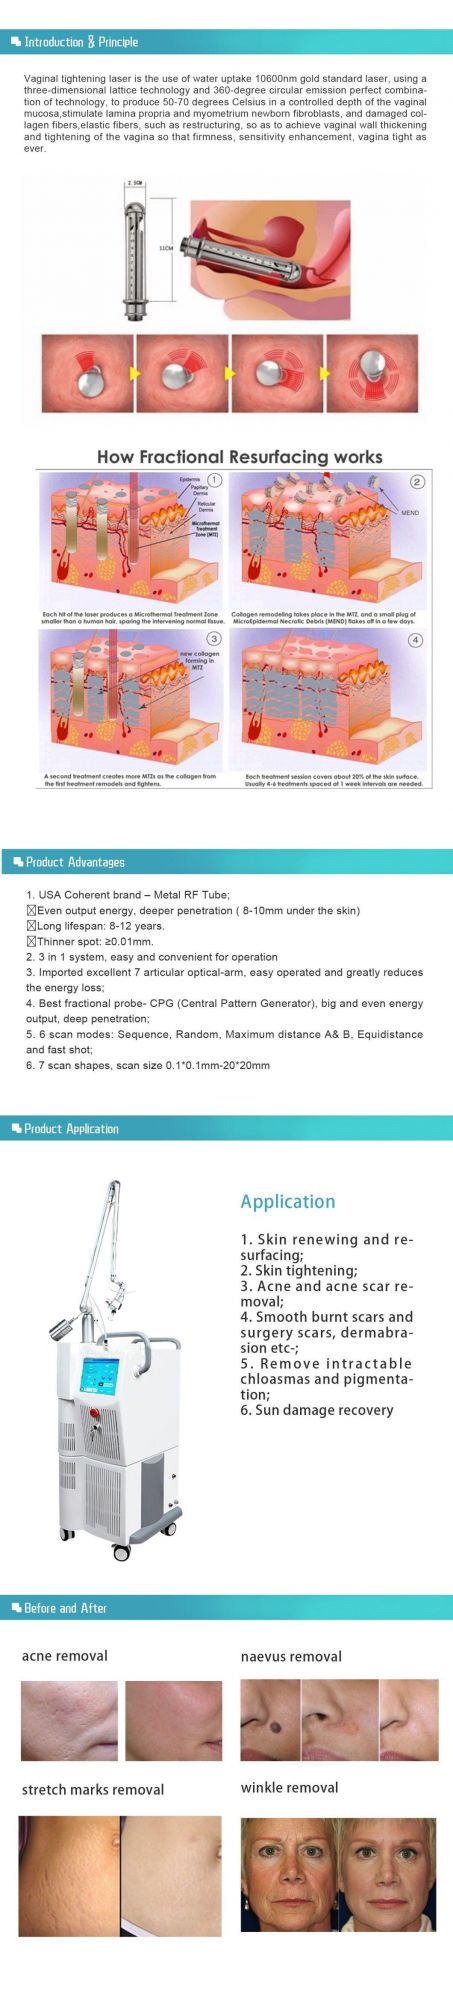 High Quality Fractional CO2 Laser Germany Standard Vaginal Tightening Treatment